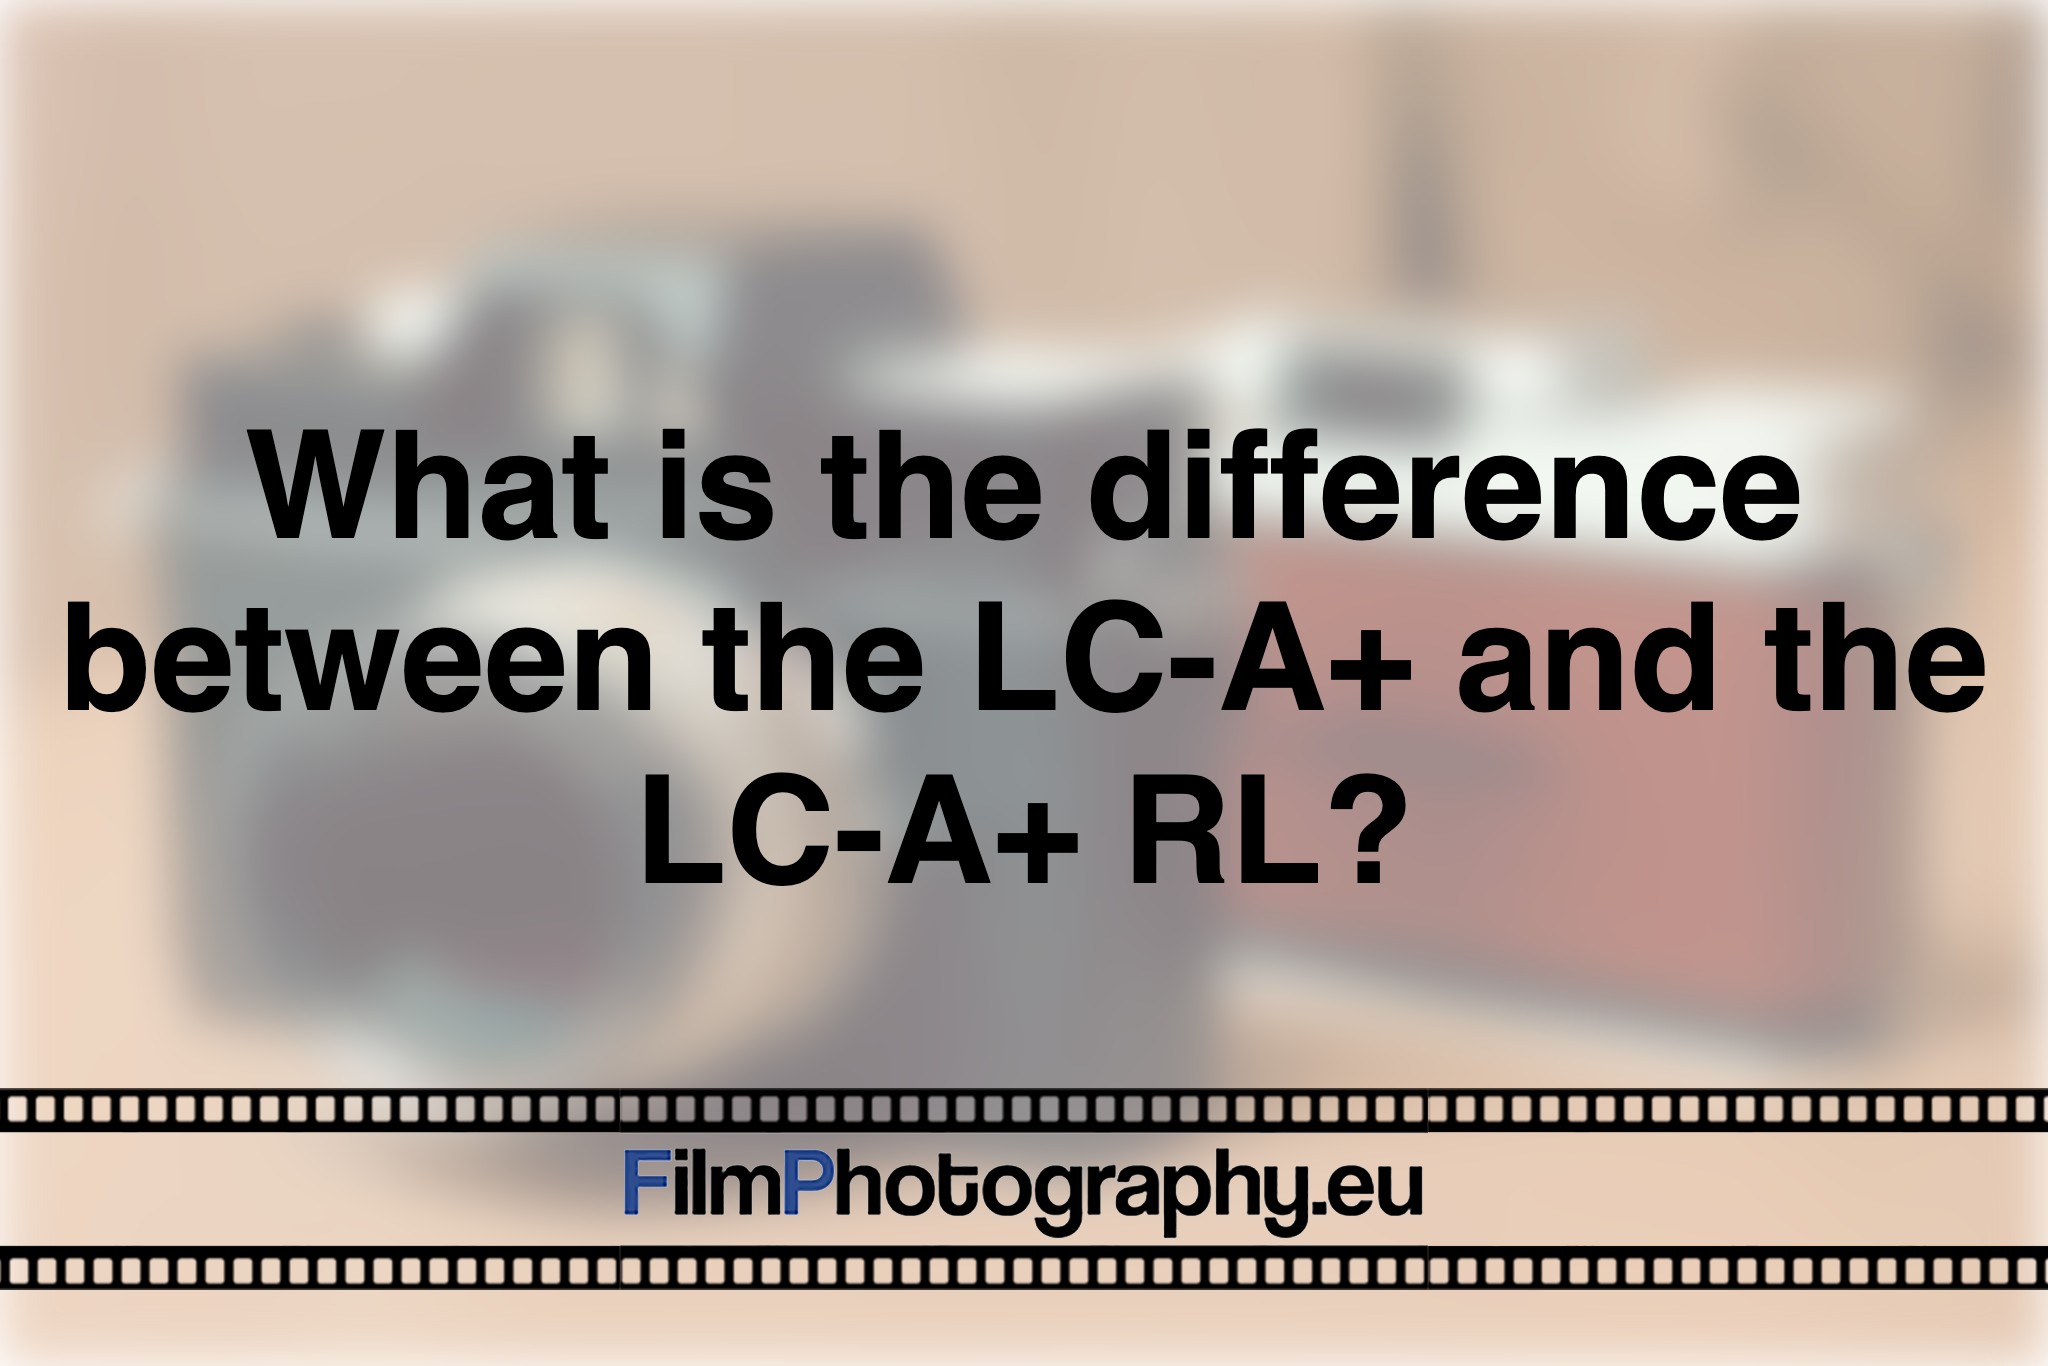 what-is-the-difference-between-the-lc-a-and-the-lc-a-rl-photo-bnv